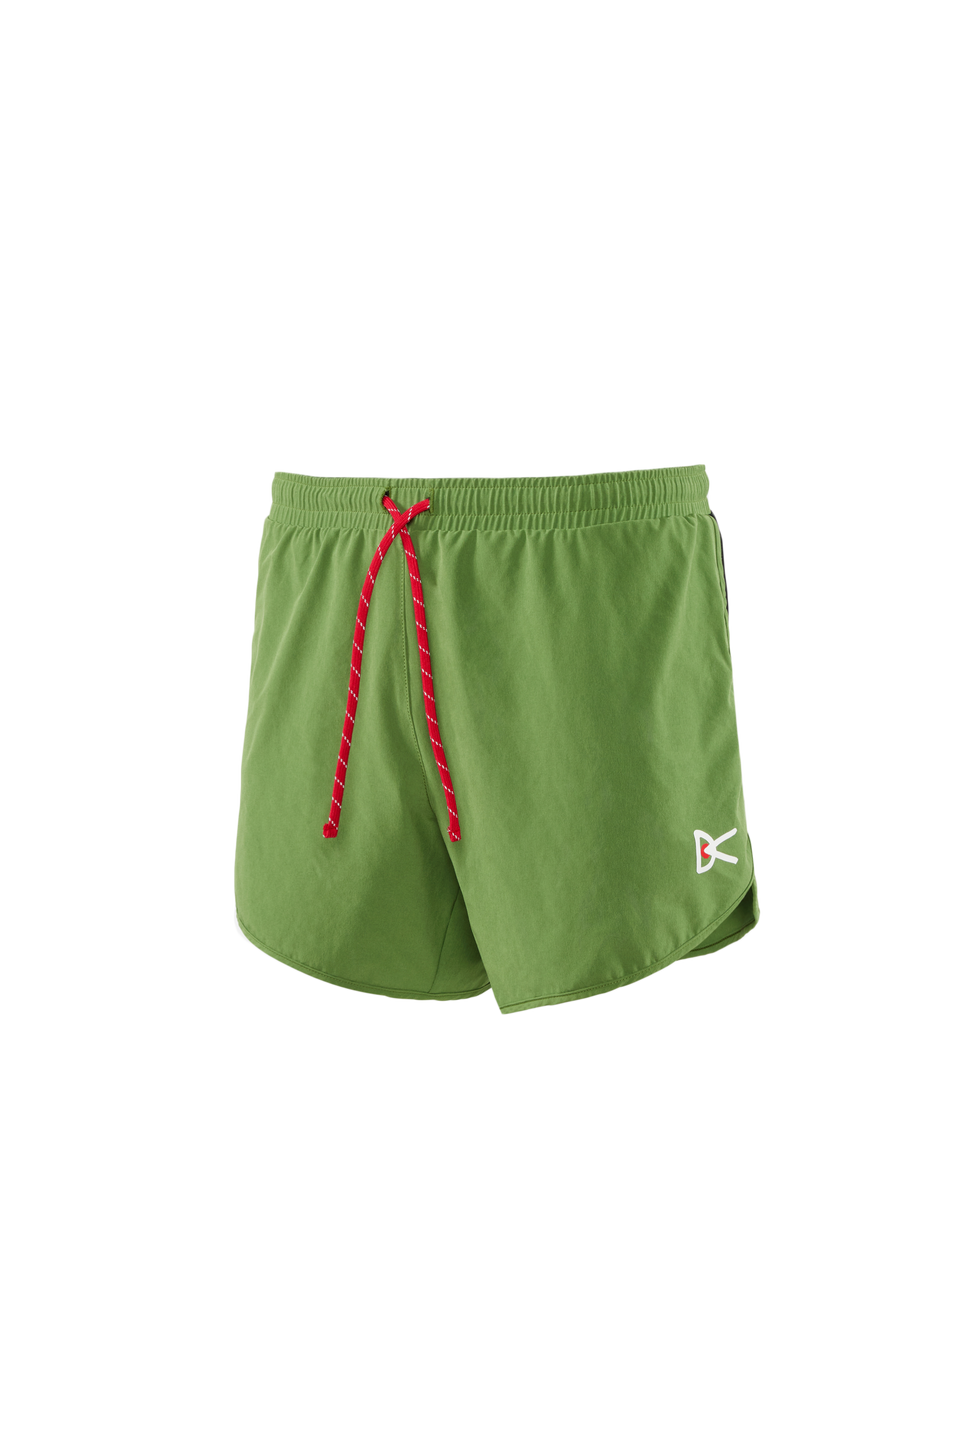 District Vision SS23 Spino 5" Training Shorts Cactus Calculus Victoria BC Canada